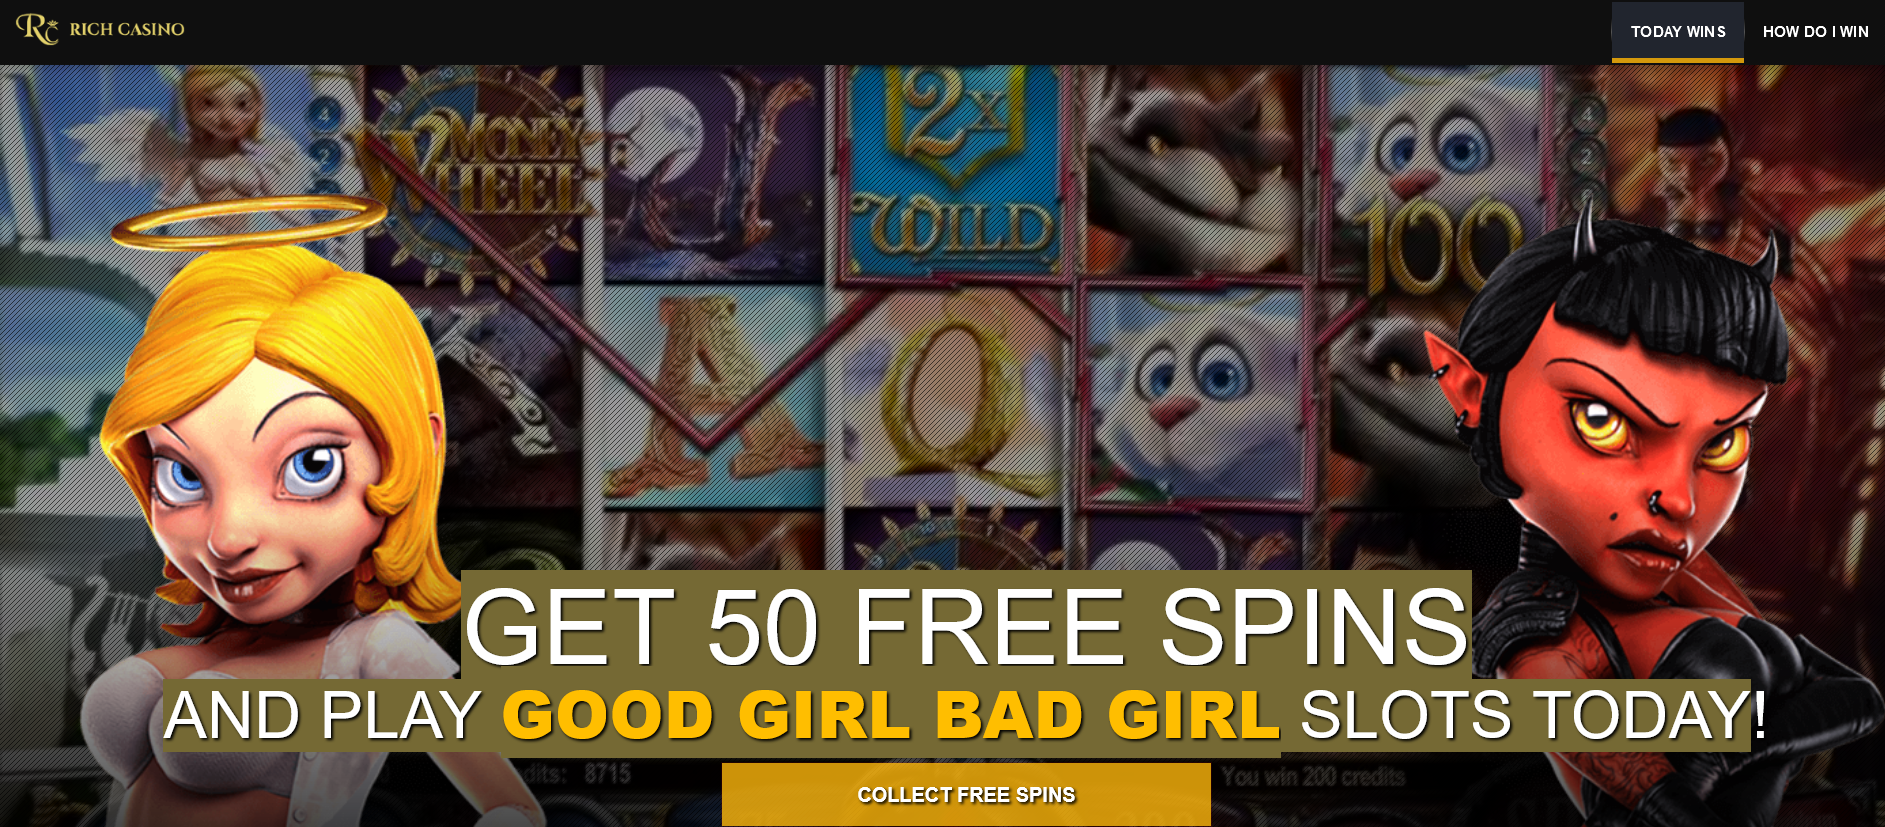 GET 50 FREE SPINS AND PLAY GOOD GIRL BAD GIRL SLOTS TODAY